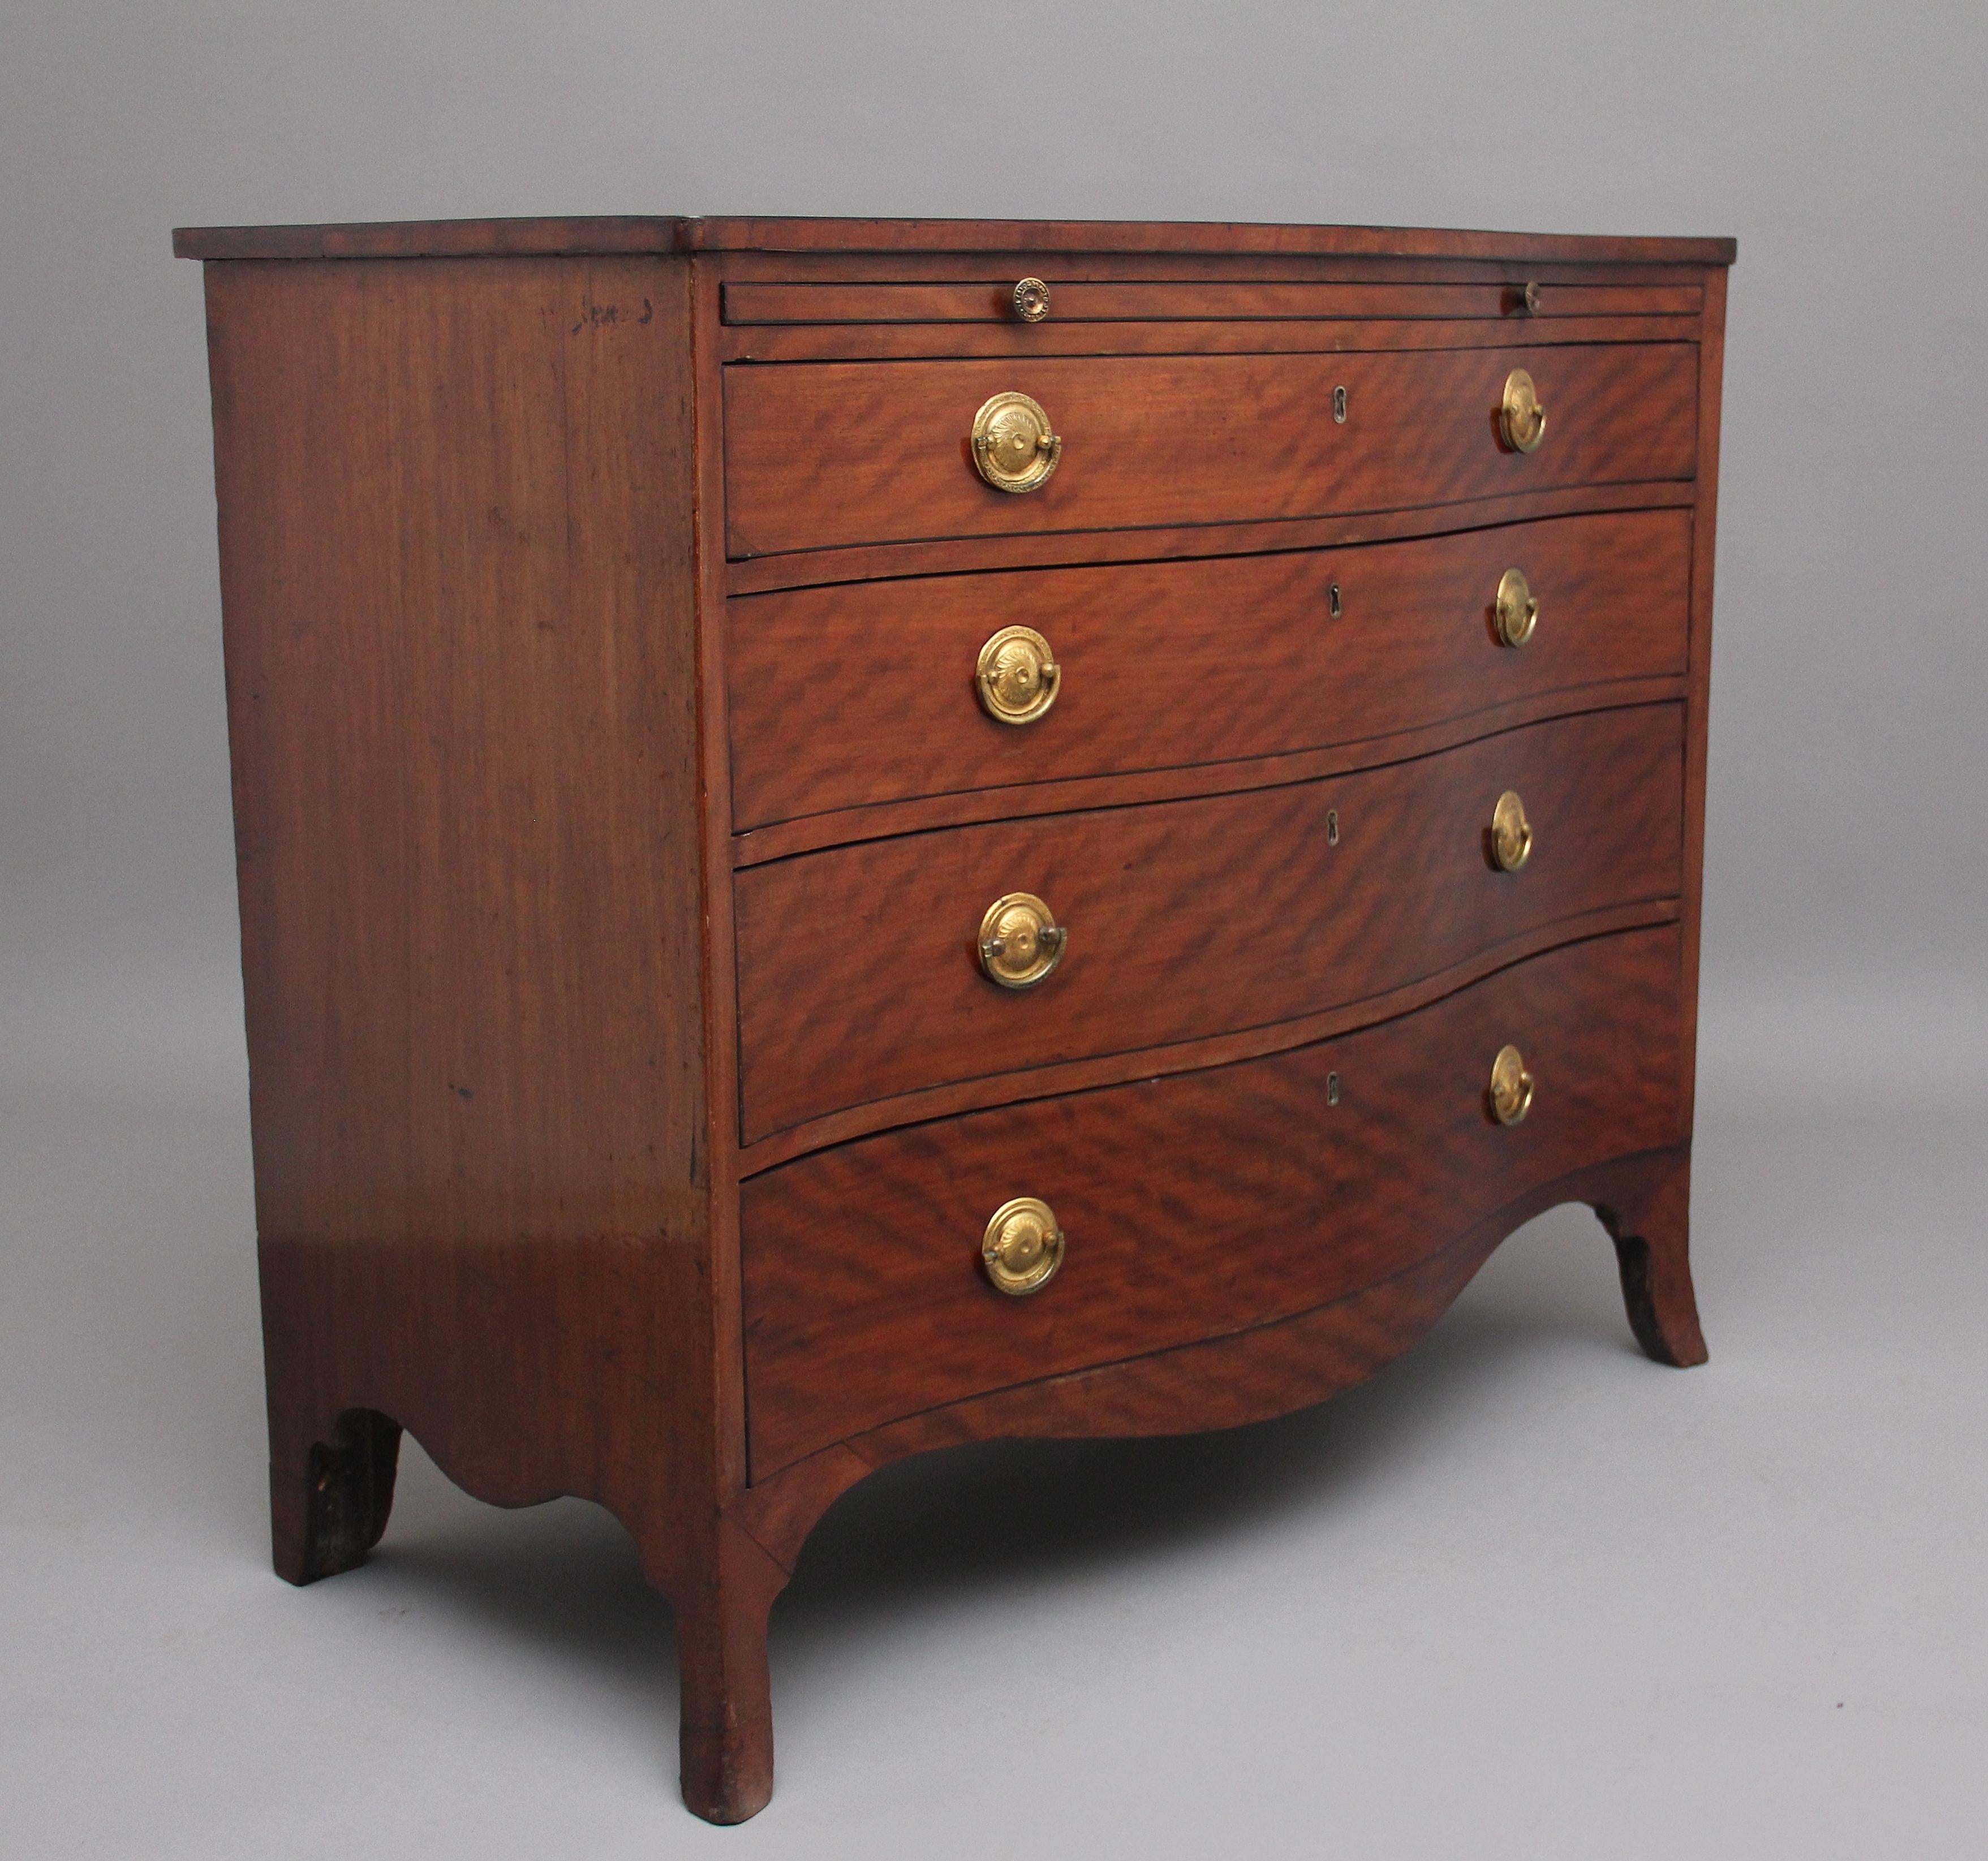 Superb quality 18th century mahogany serpentine chest of drawers, the lovely figured and crossbanded top with a brushing slide below, four graduated long oak lined drawers, with wonderful figuration on the drawer fronts, engraved brass ring handles